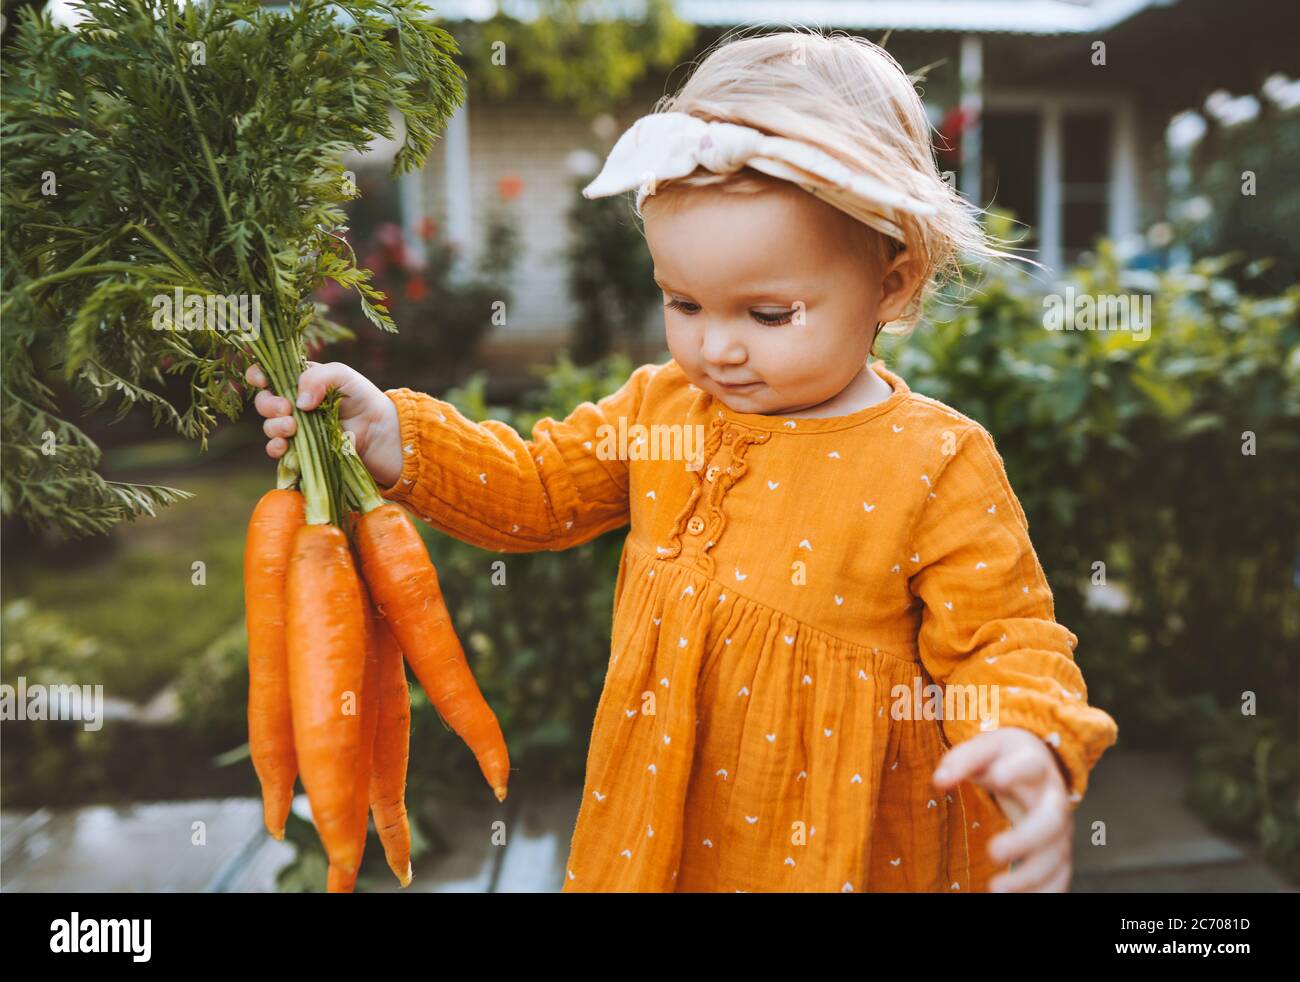 Child holding carrots in garden healthy food lifestyle vegan organic vegetables homegrown agriculture farming concept Stock Photo